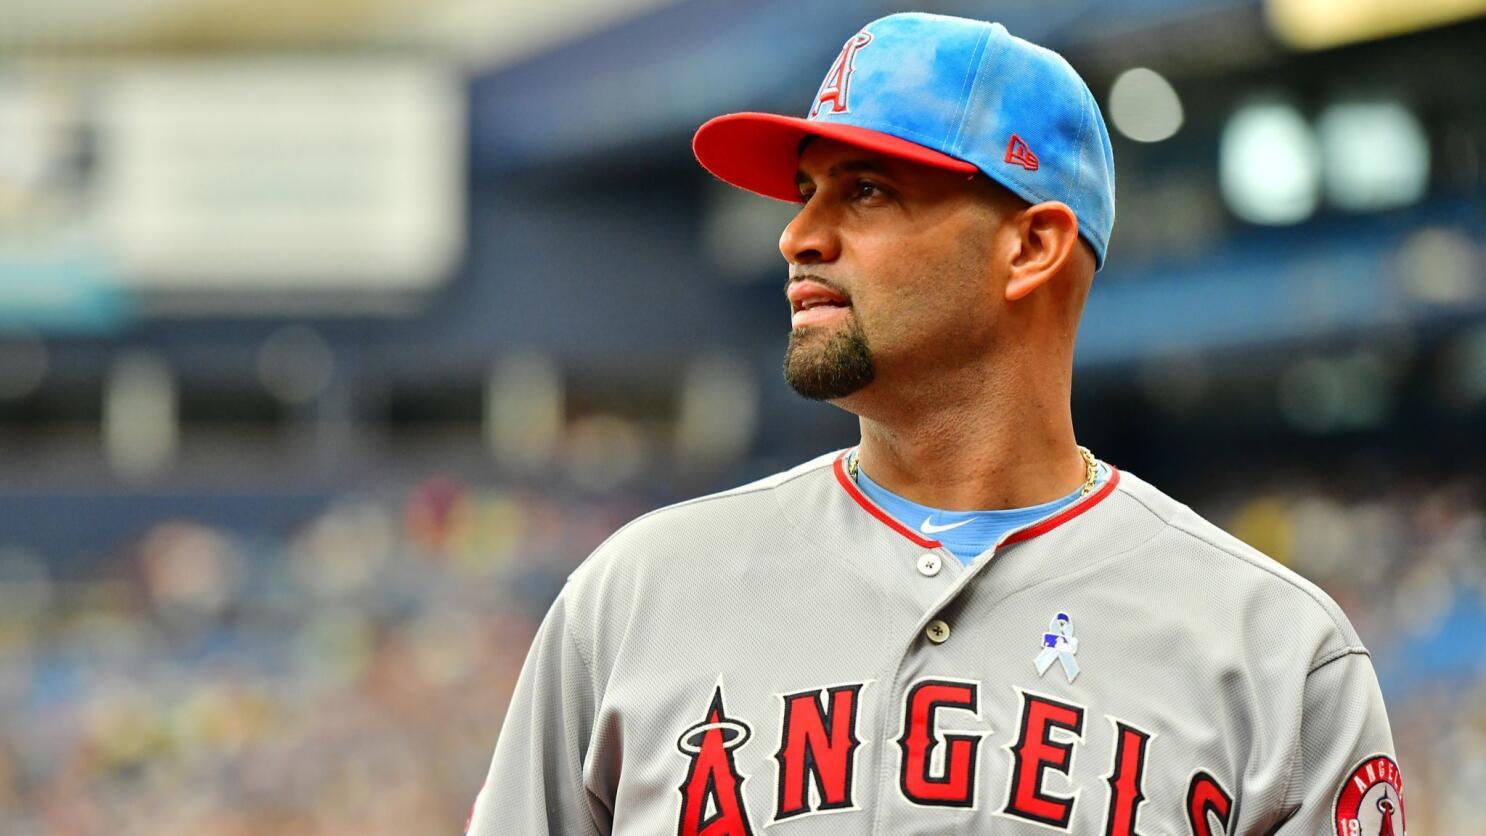 Albert Pujols to be Honored During Musial Awards - MPress